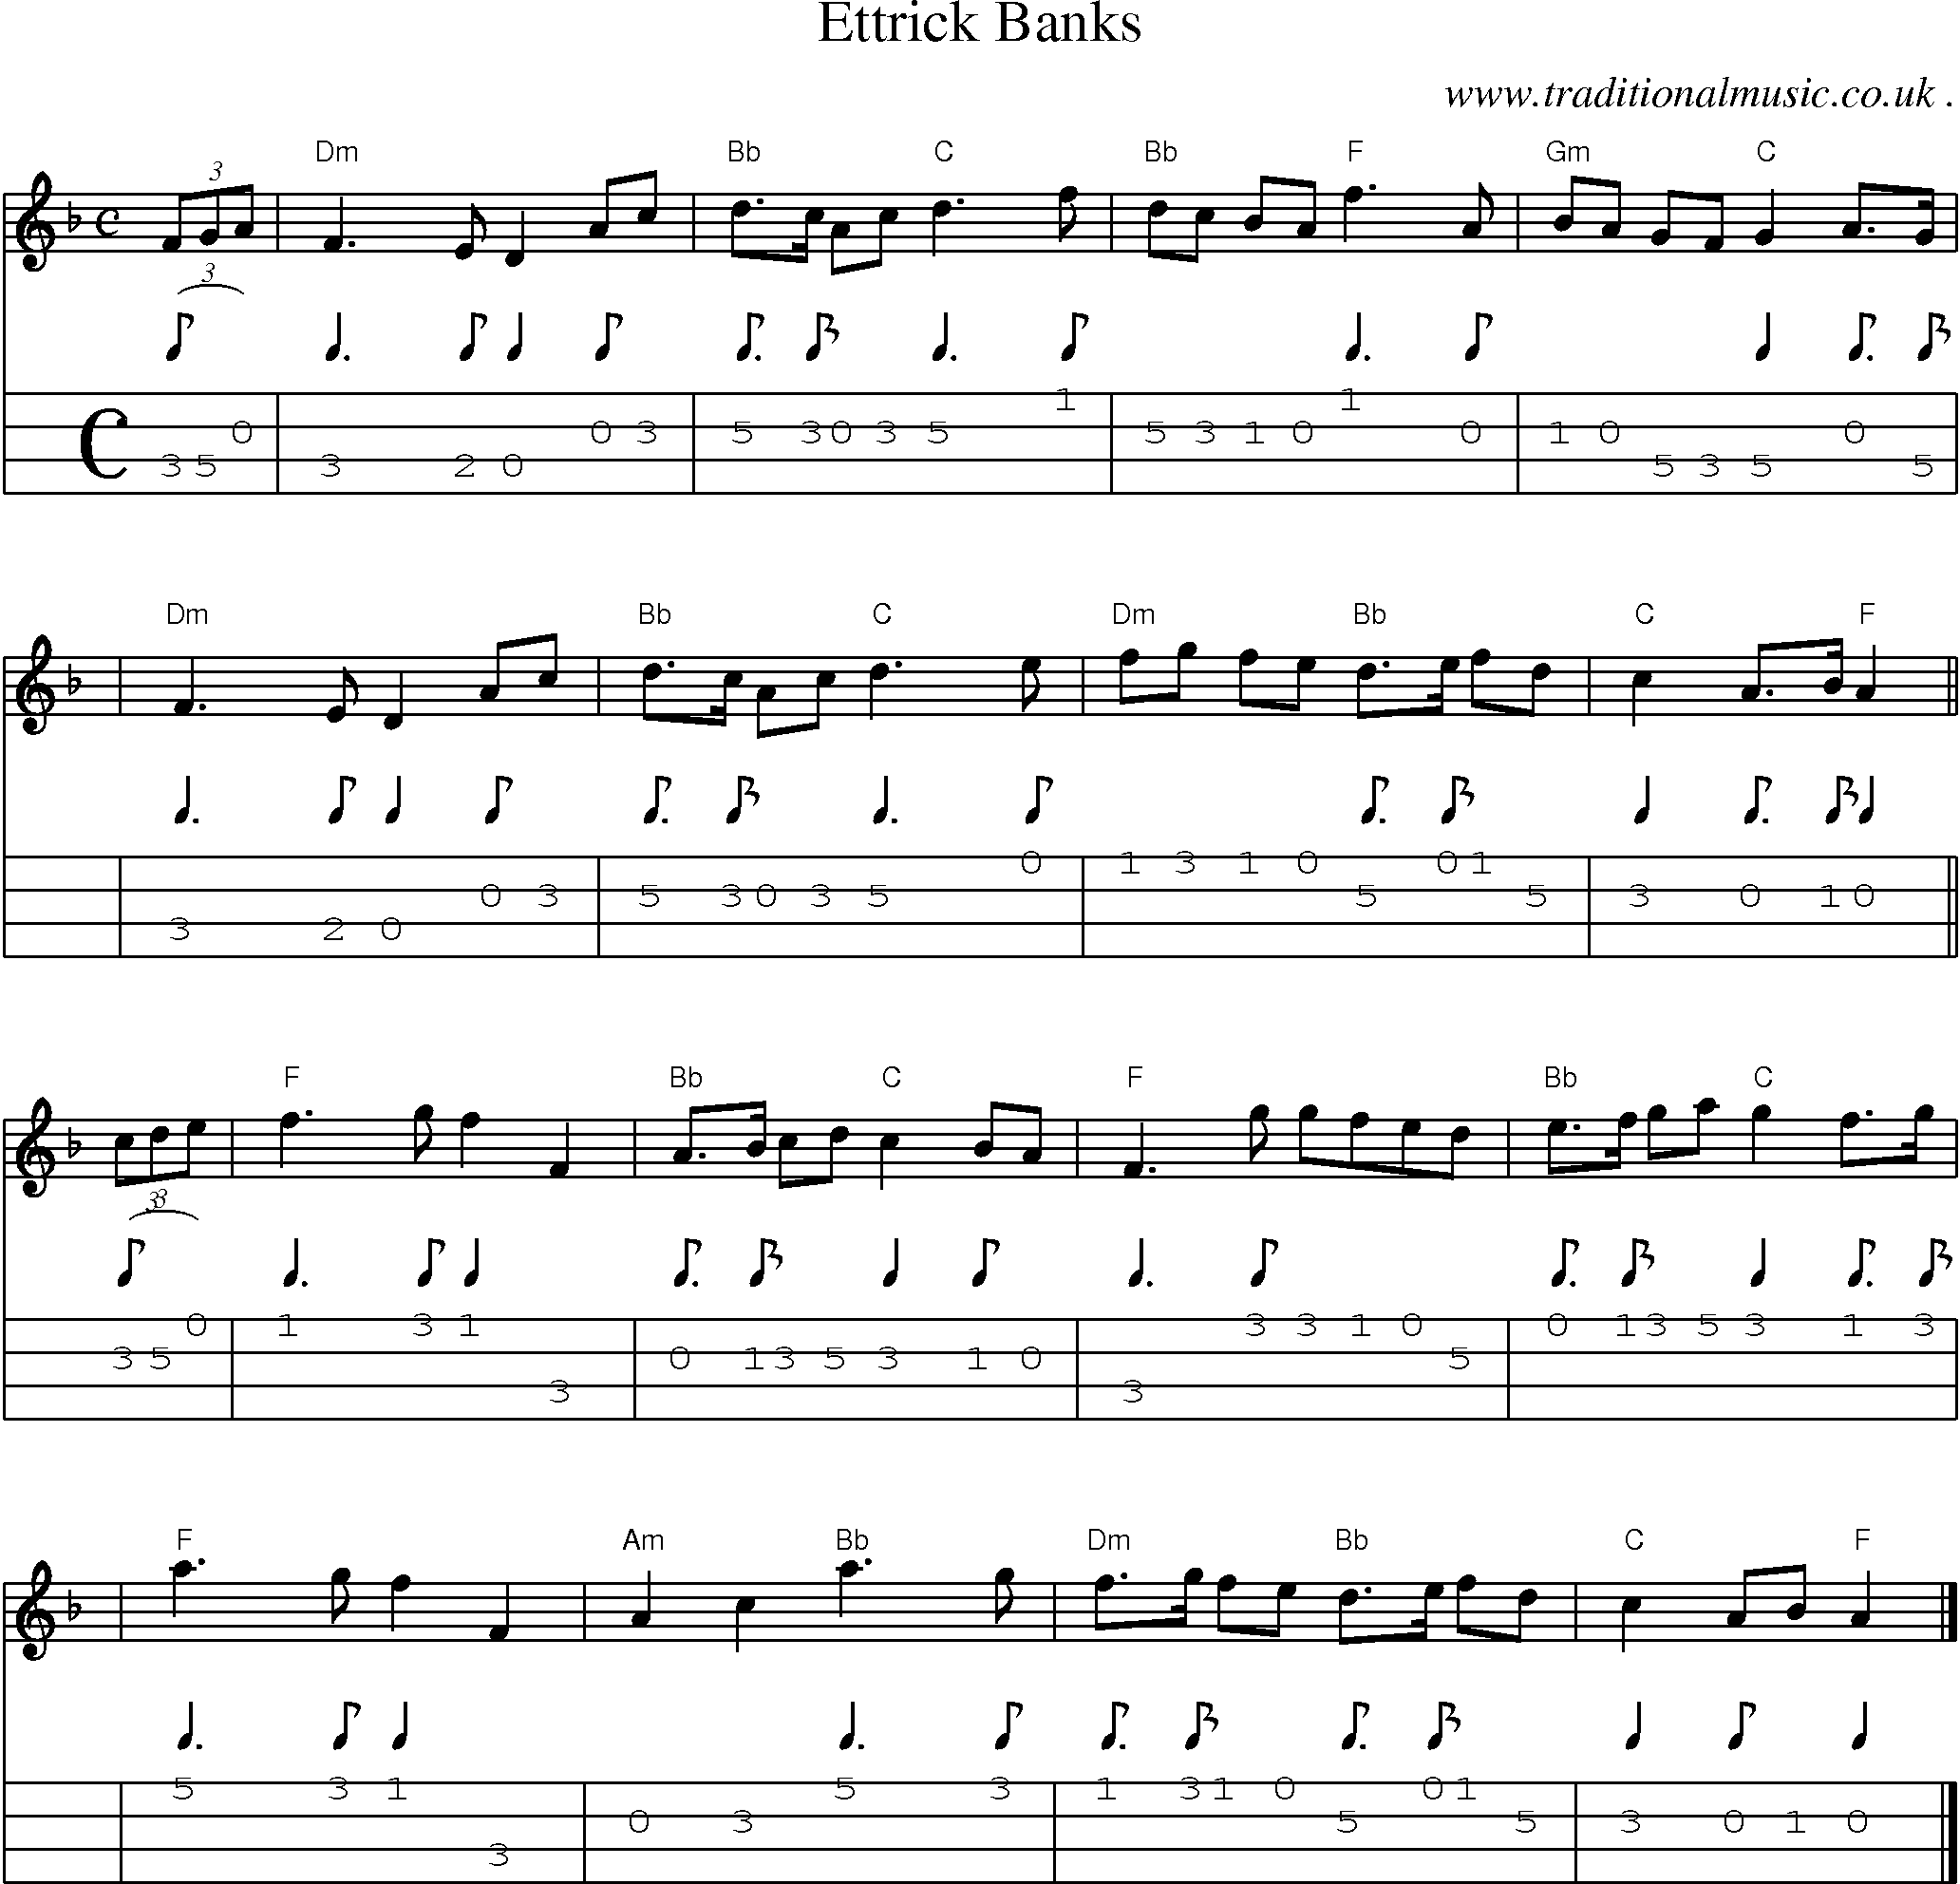 Sheet-music  score, Chords and Mandolin Tabs for Ettrick Banks